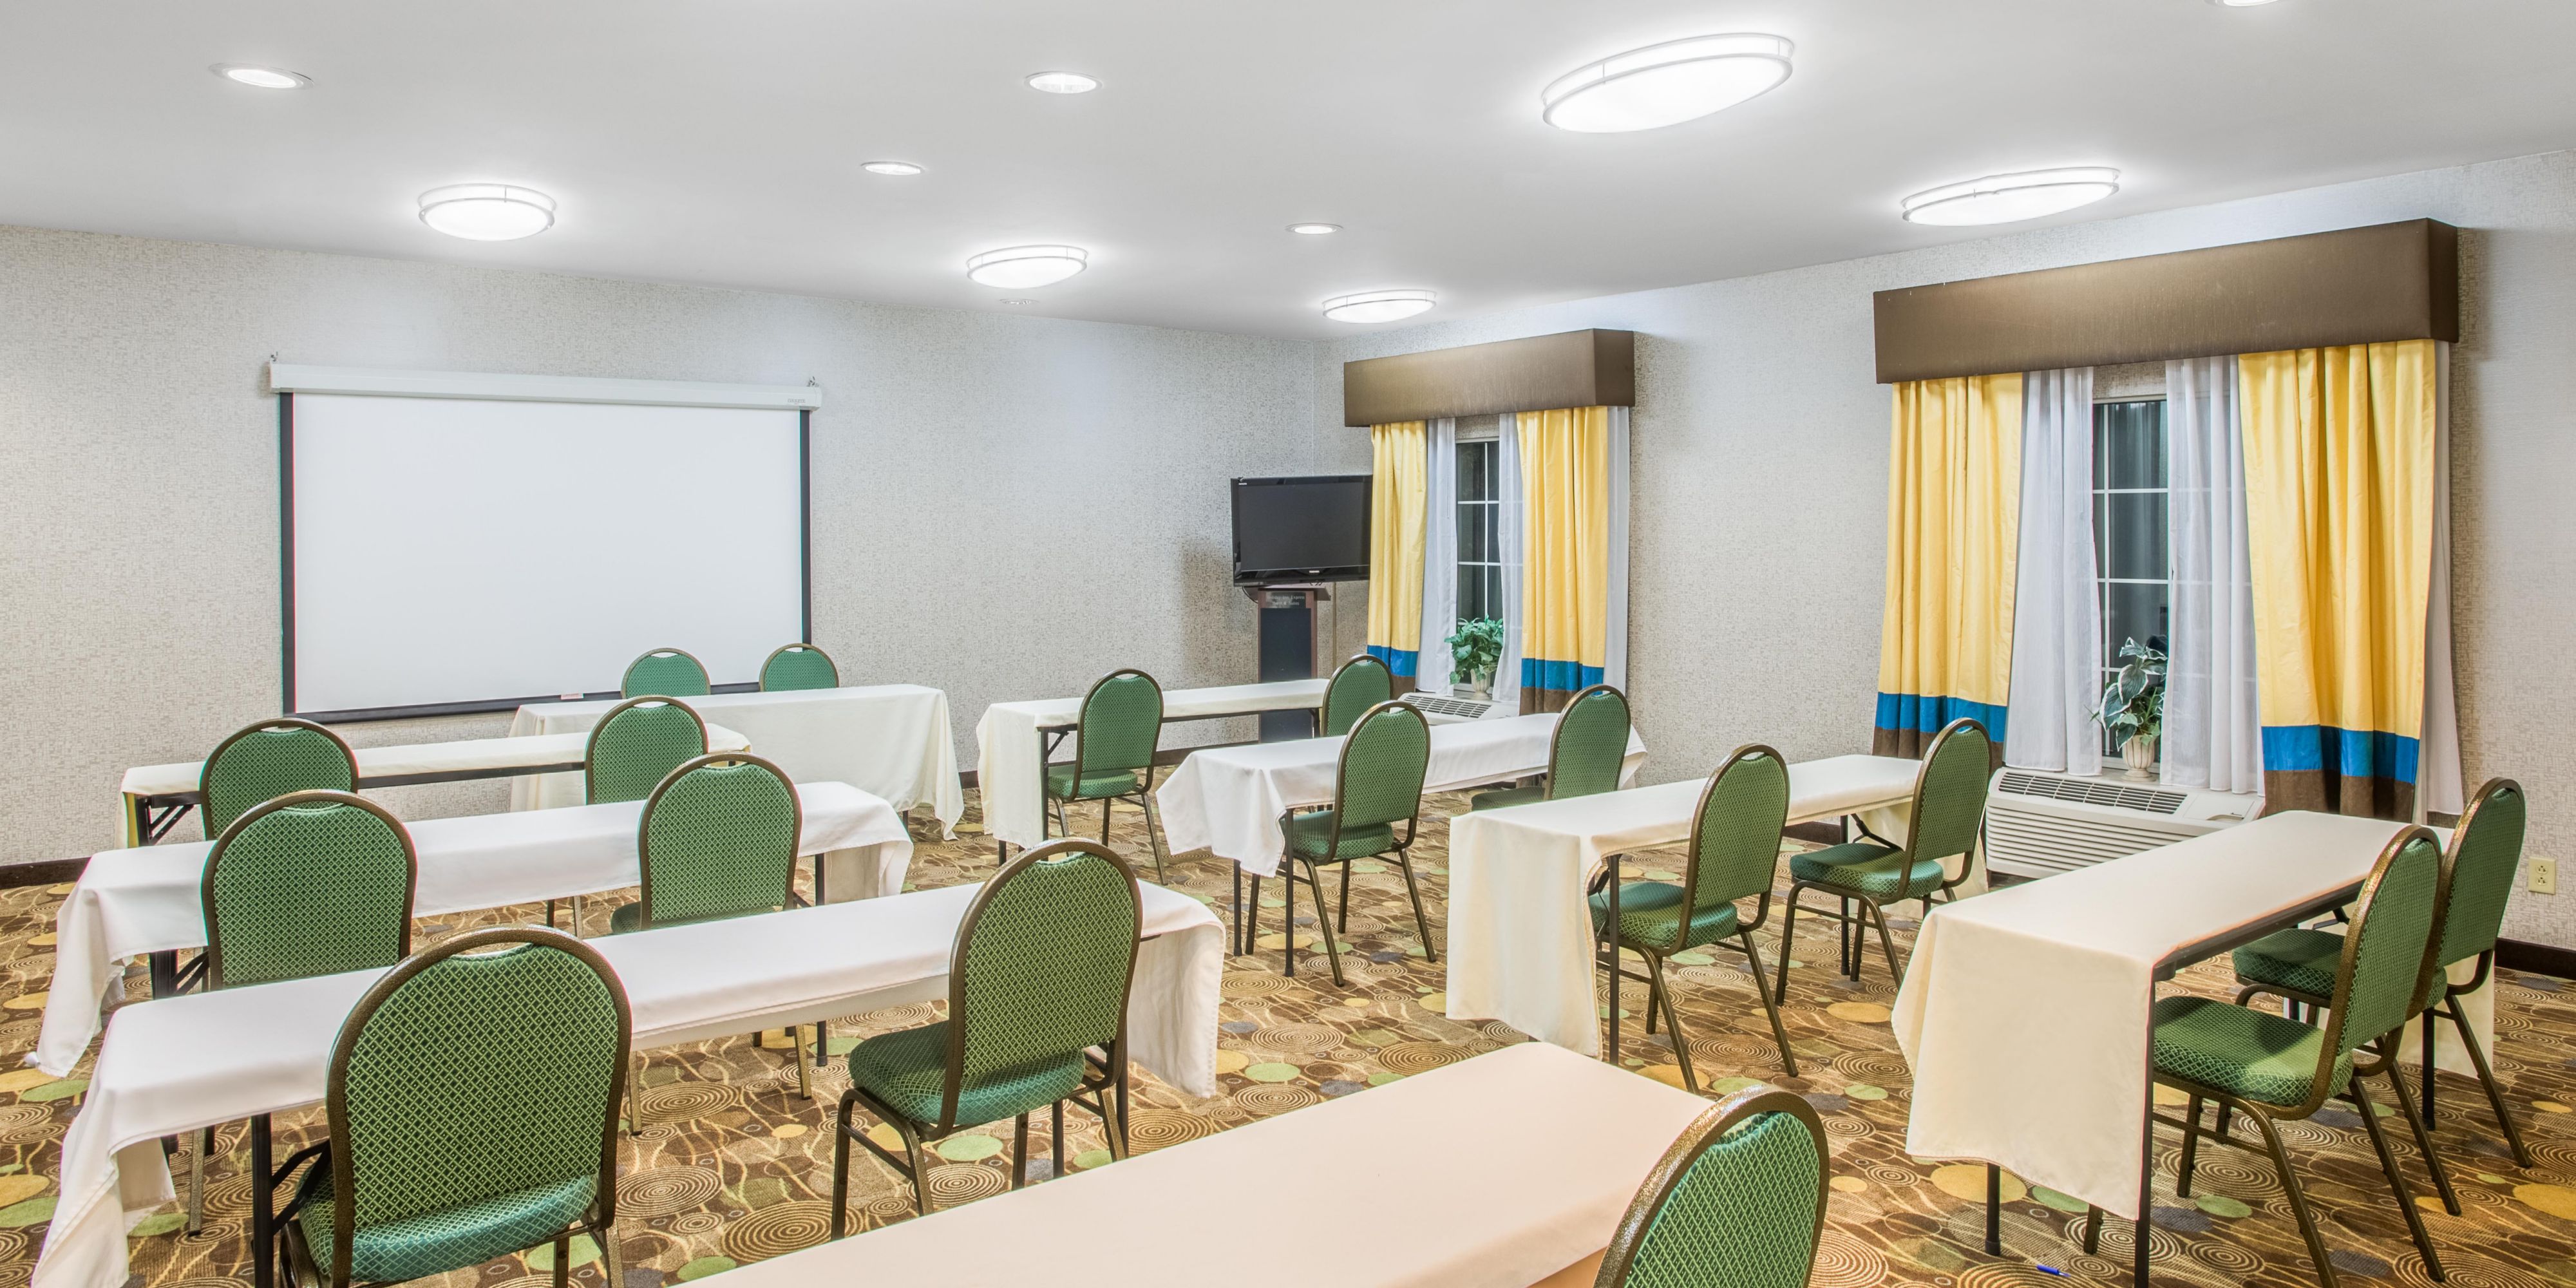 Looking for a space to hold your family reunion, business meeting, or small event? We offer flexible meeting space for up to 50 people. Contact our team at 802-257-2400 or click learn more to send our team an email. 